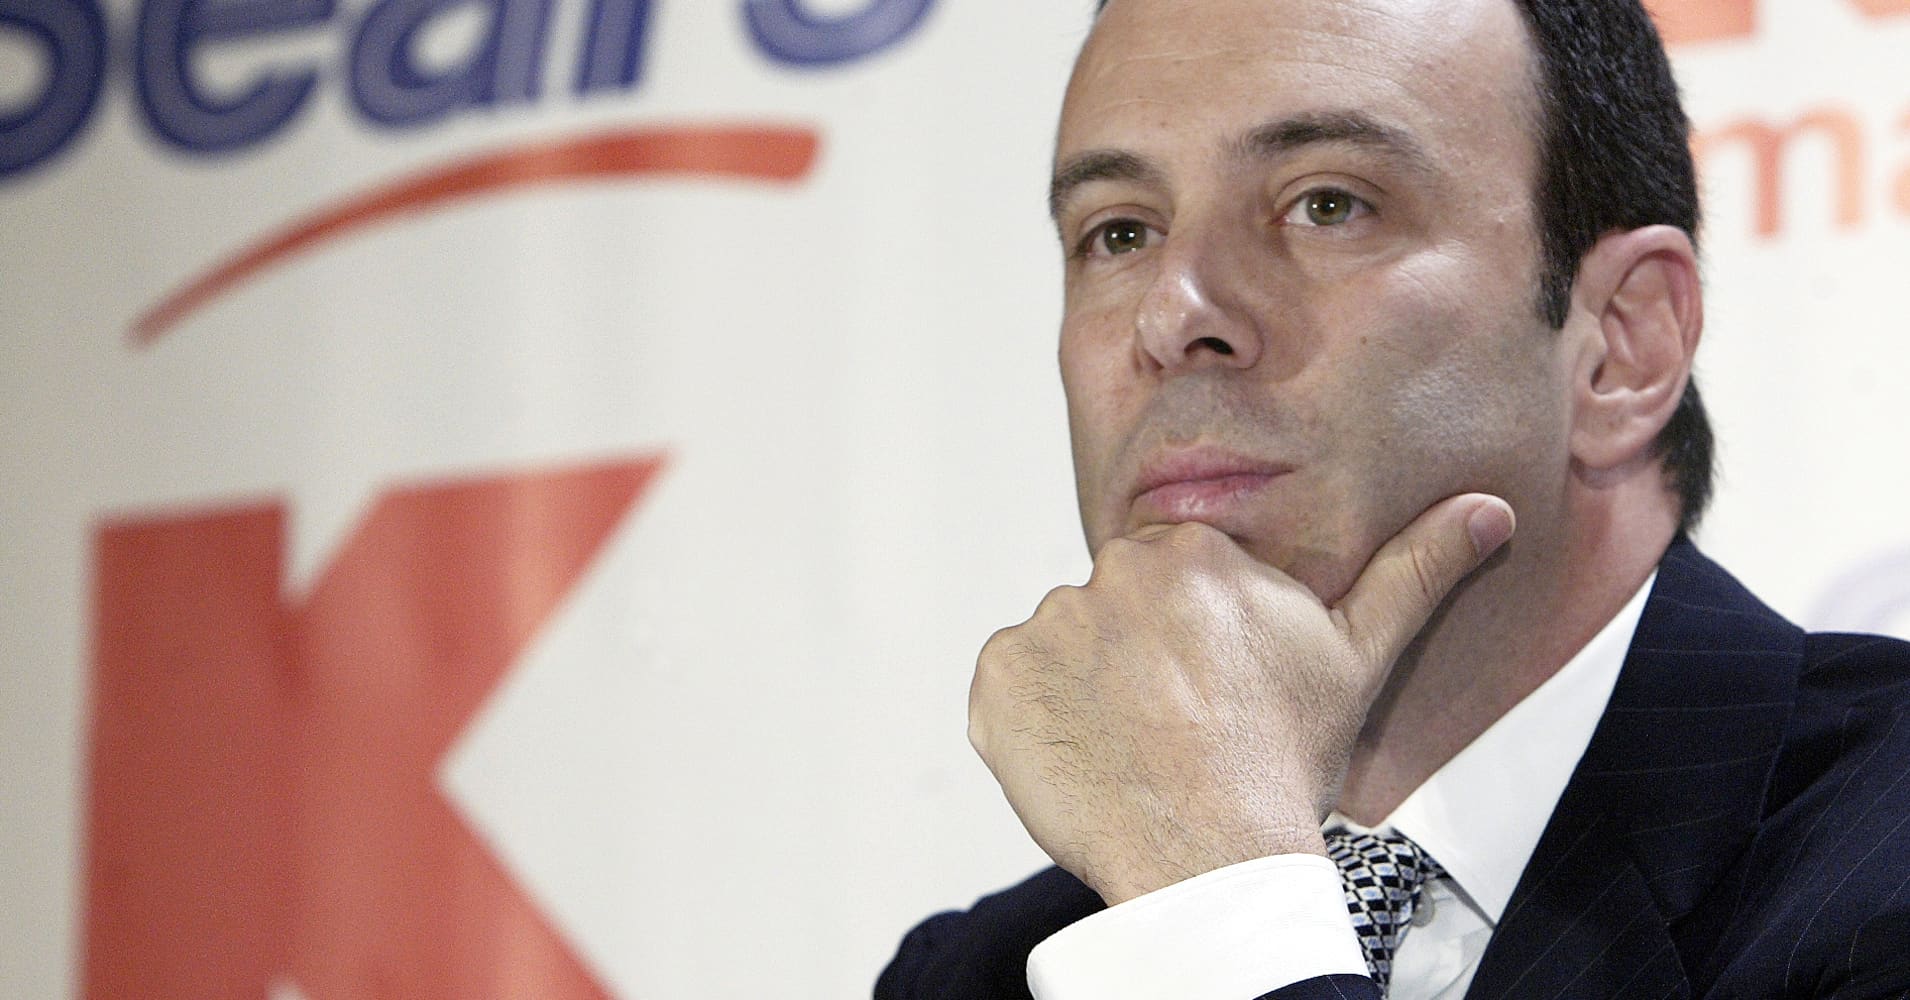 Sears plans to shutter after 126 years in business as Chairman Eddie Lampert's bid fails